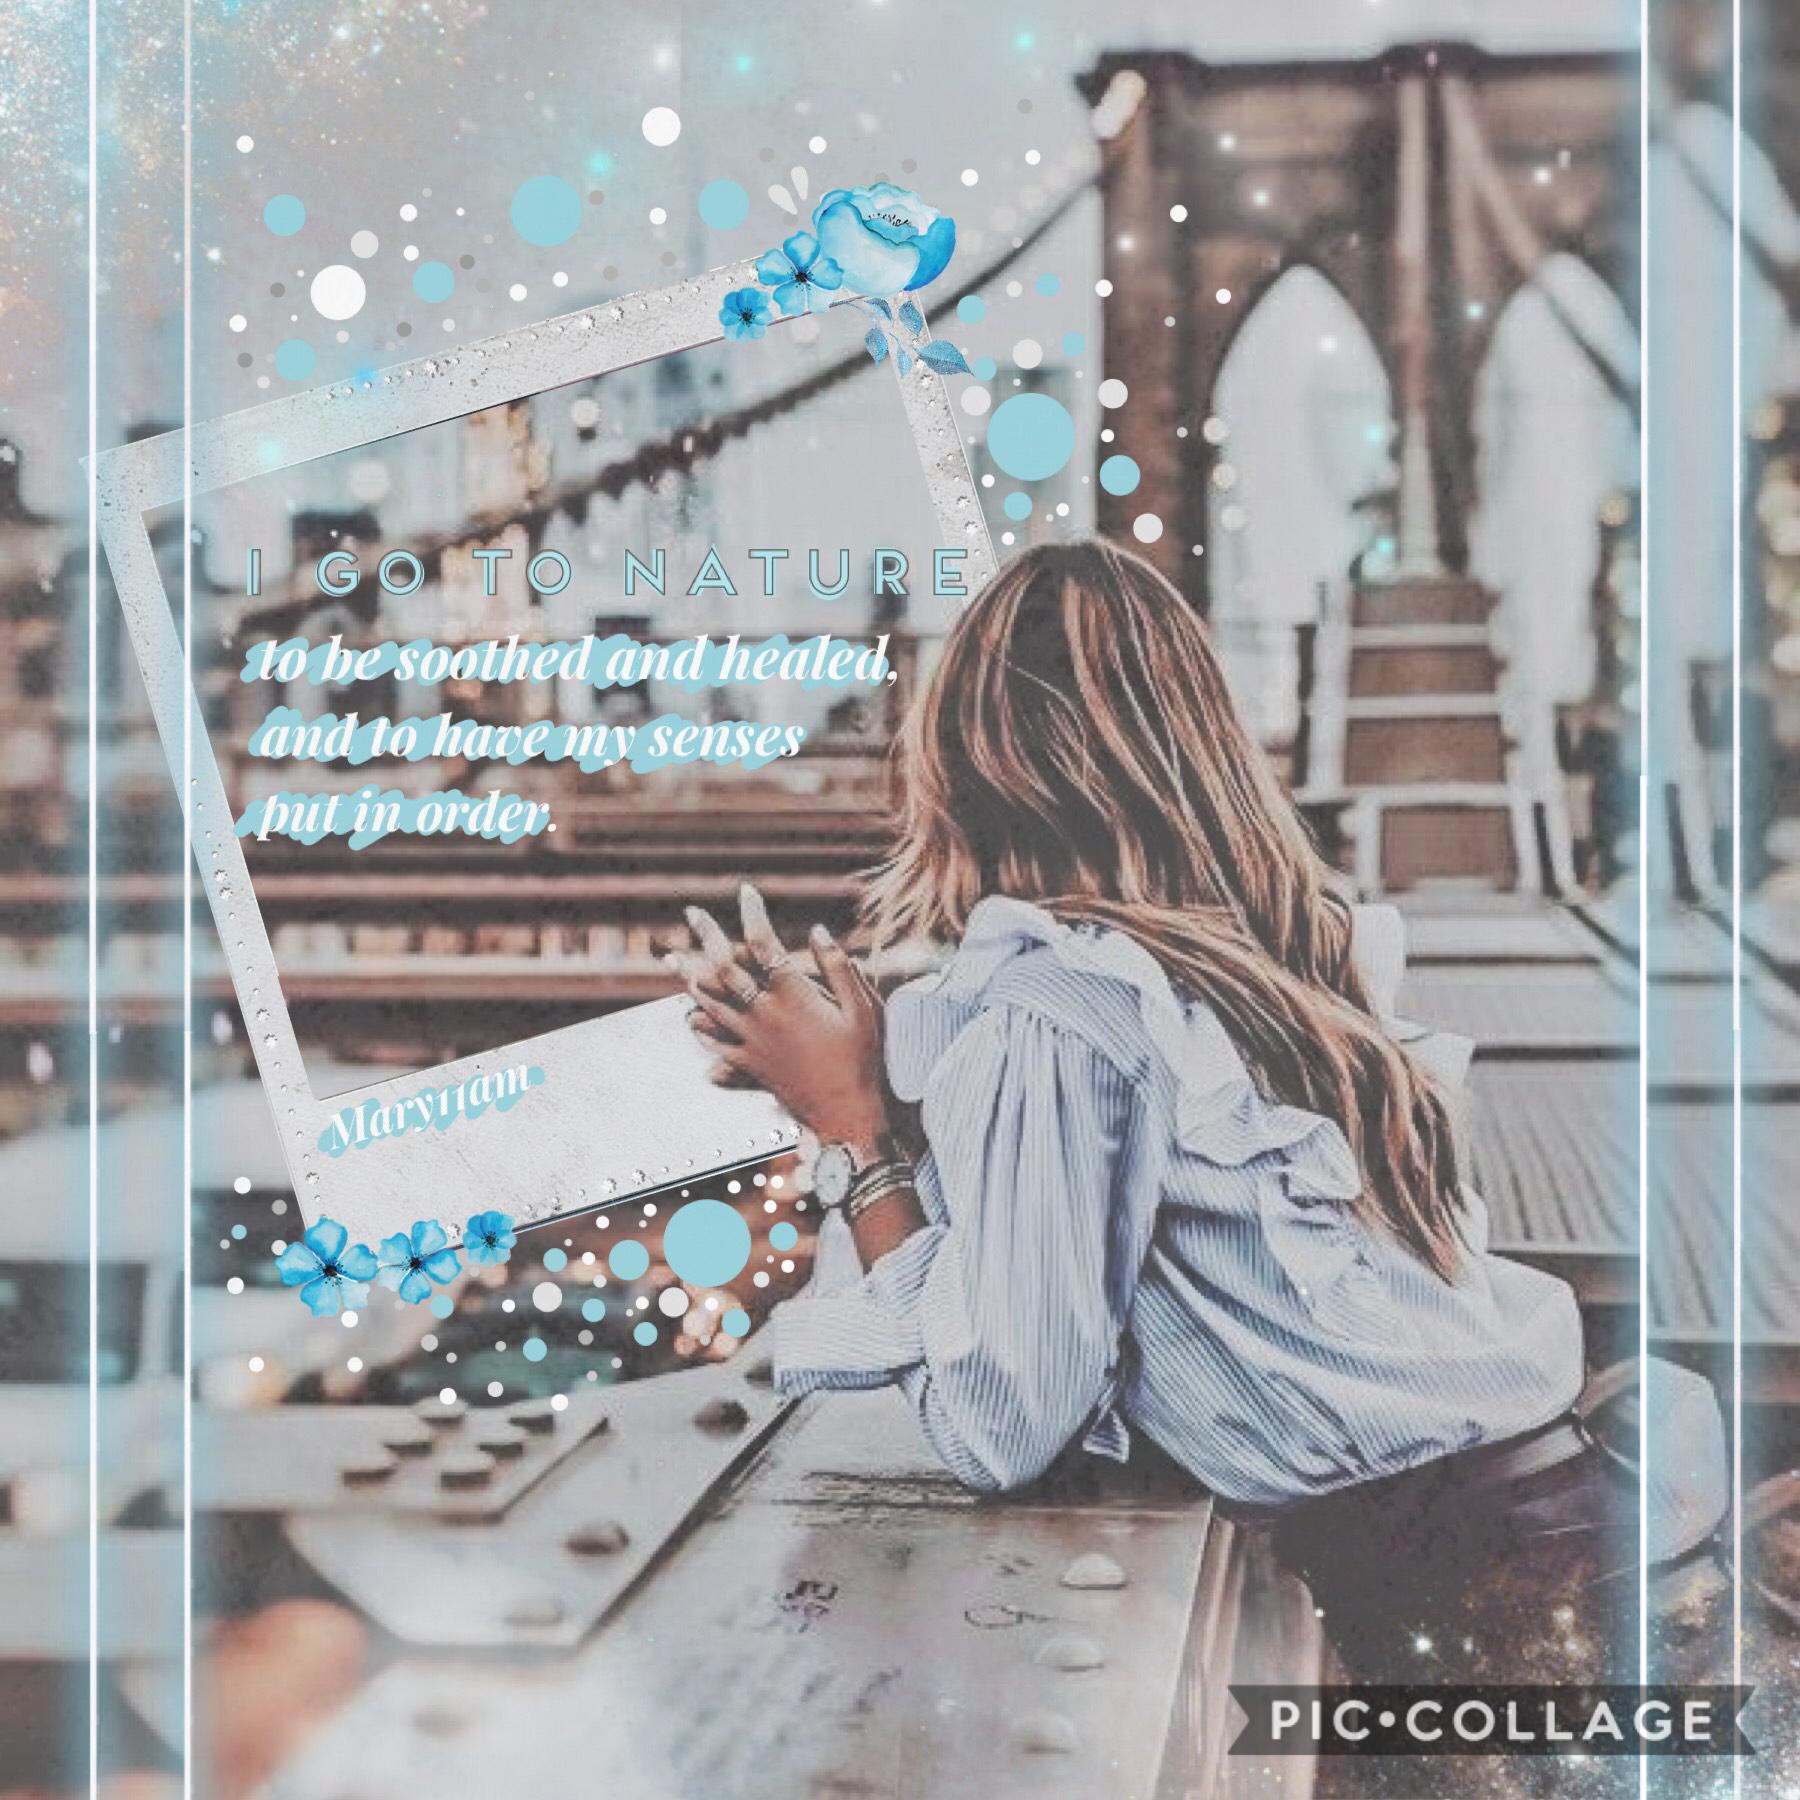 ✨TAP!✨
Thank you all soo much for all the love an support you all have given me throughout my whole time on pc!♥️
✨QOTD: How long have you been on PicCollage for?  ✨AOTD: Around 5-6 months!✨